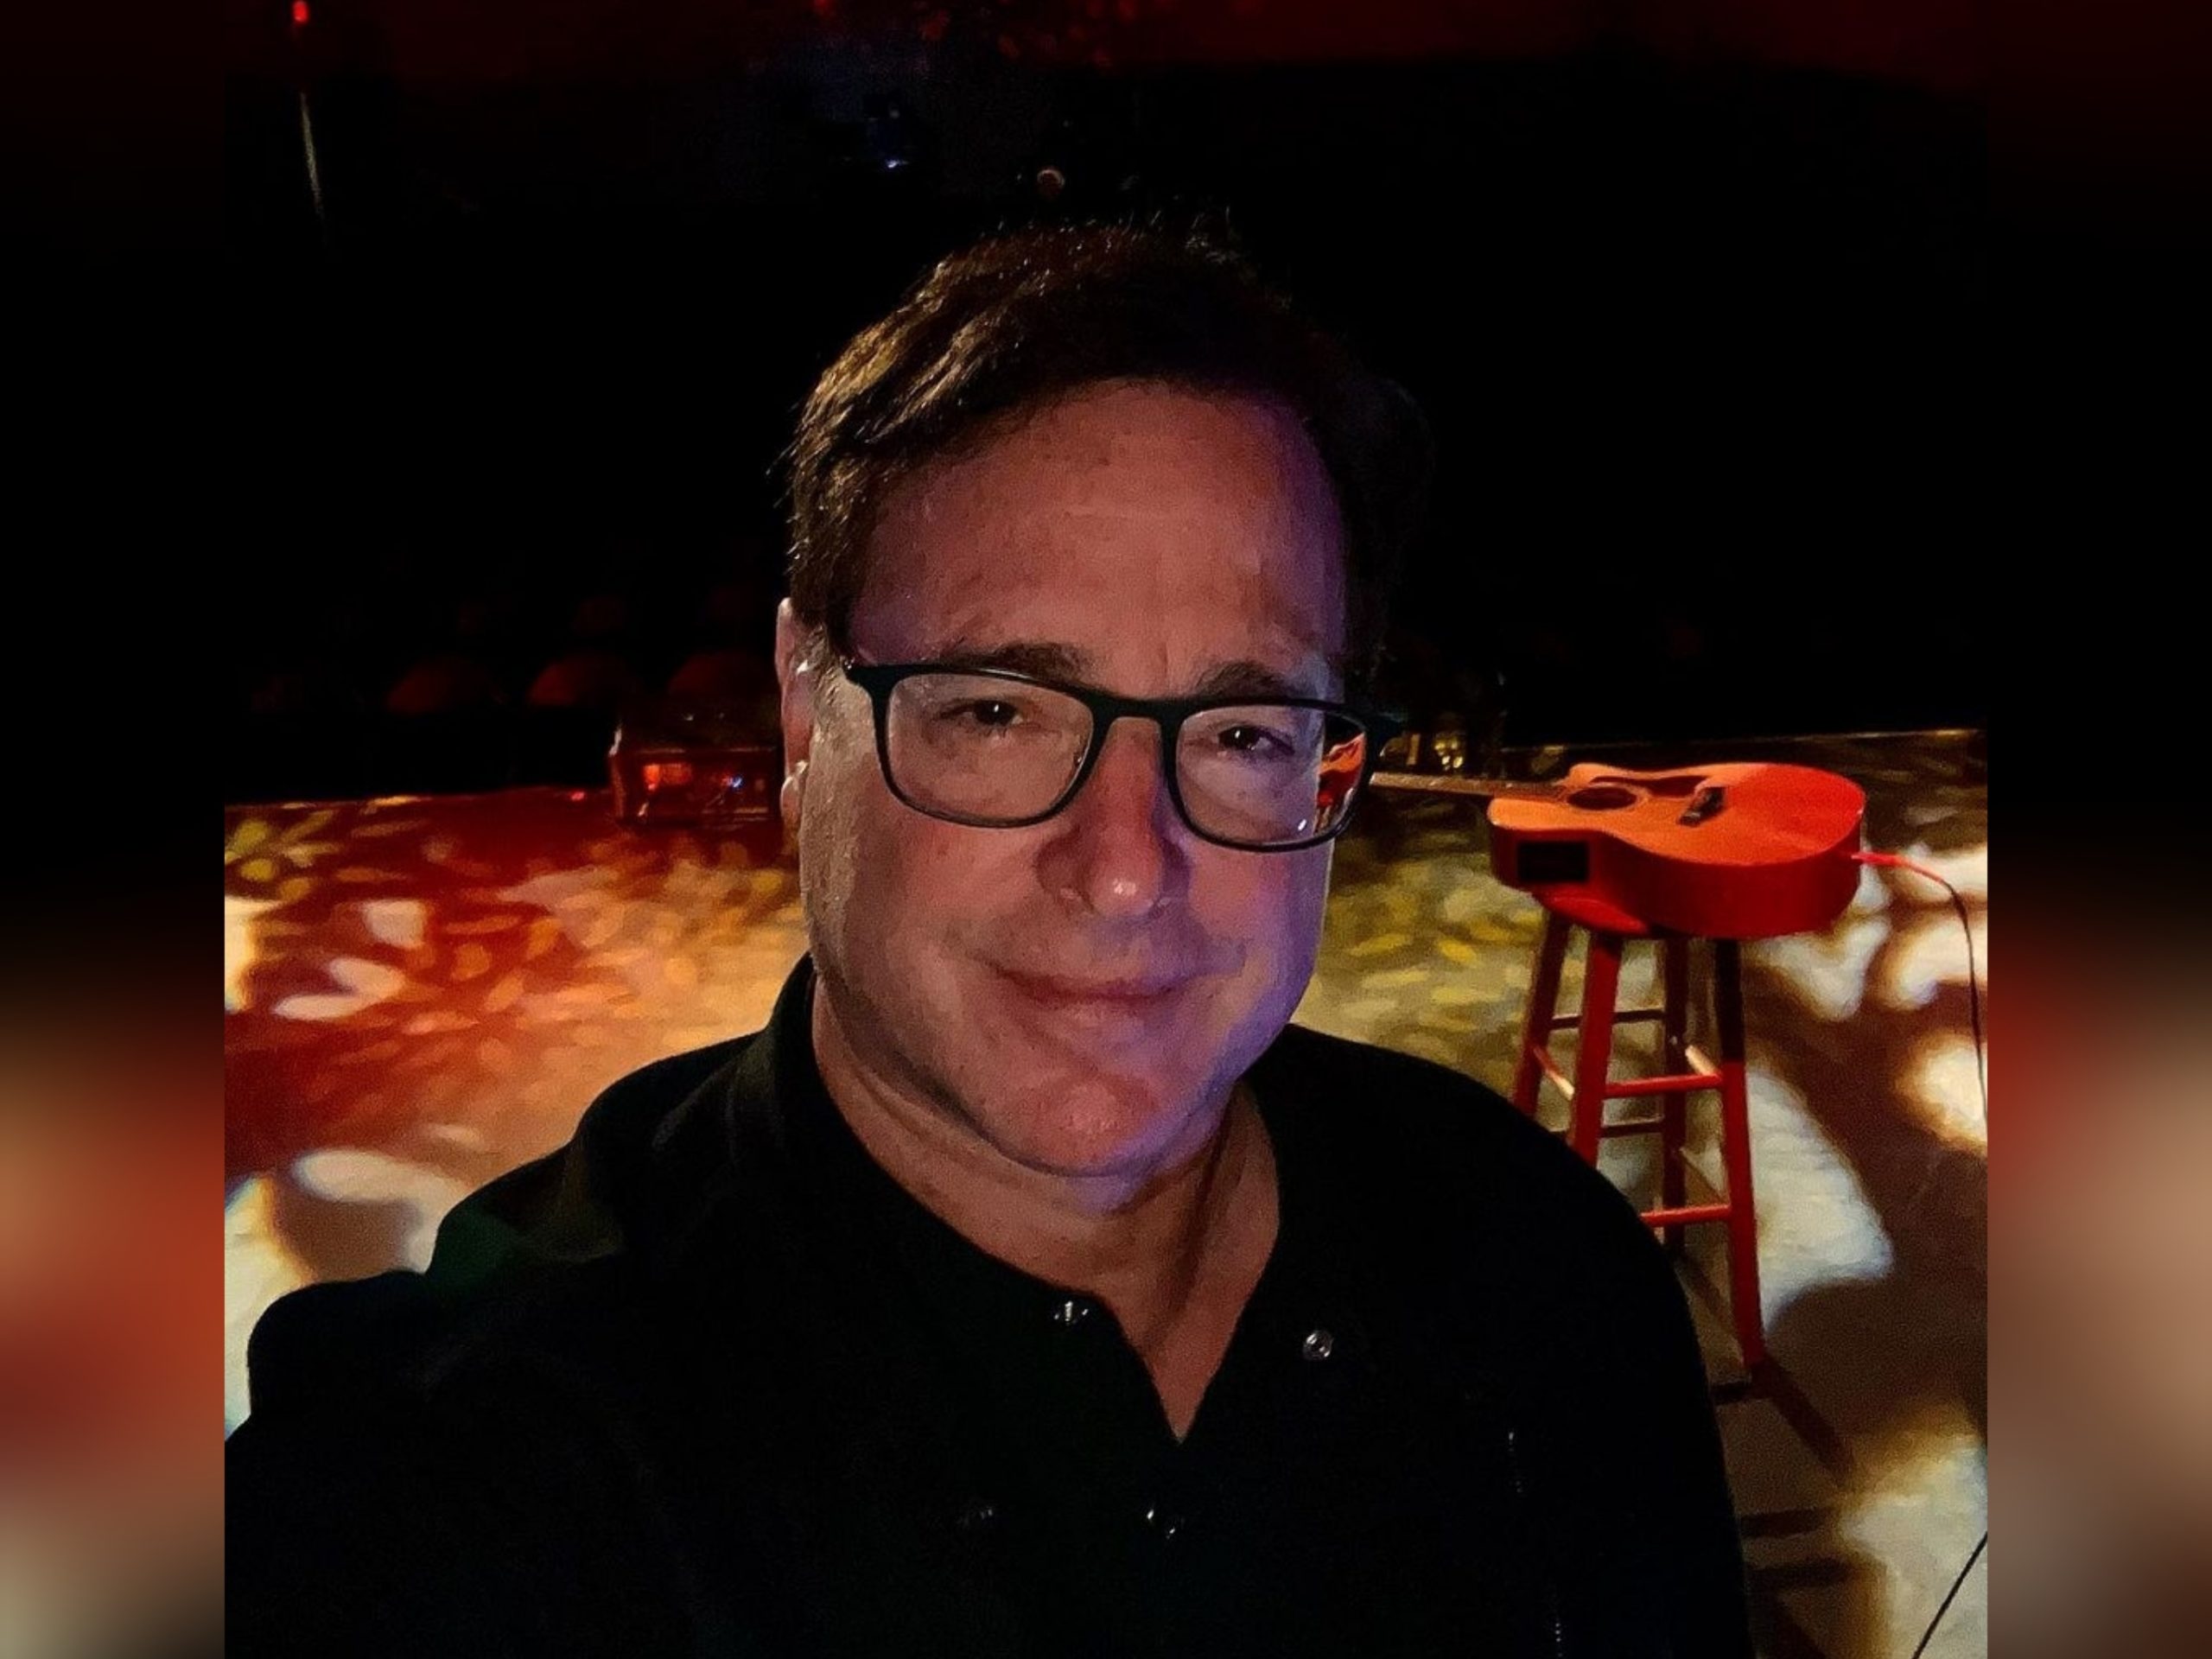 Bob Saget’s Family Shares He Died From Accidental Head Trauma